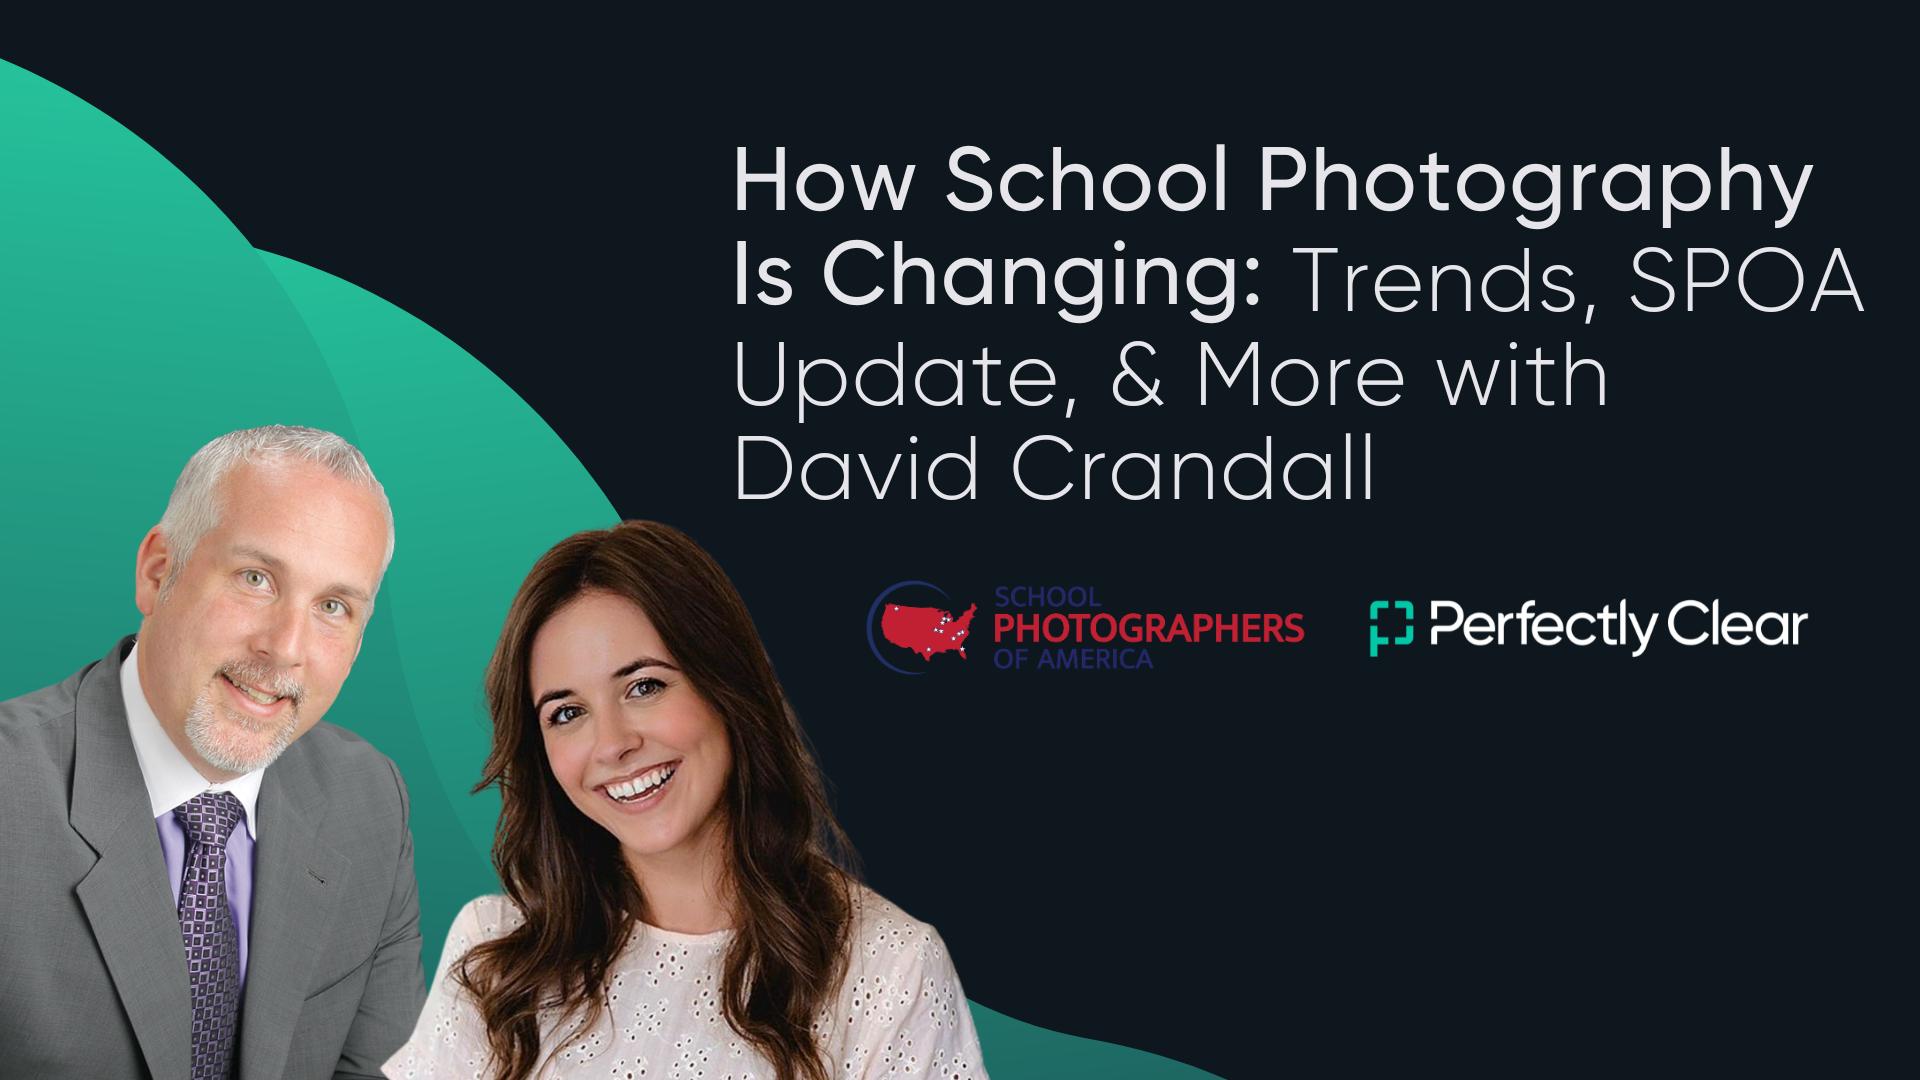 How School Photography Is Changing: Trends, SPOA Update, & More with David Crandall